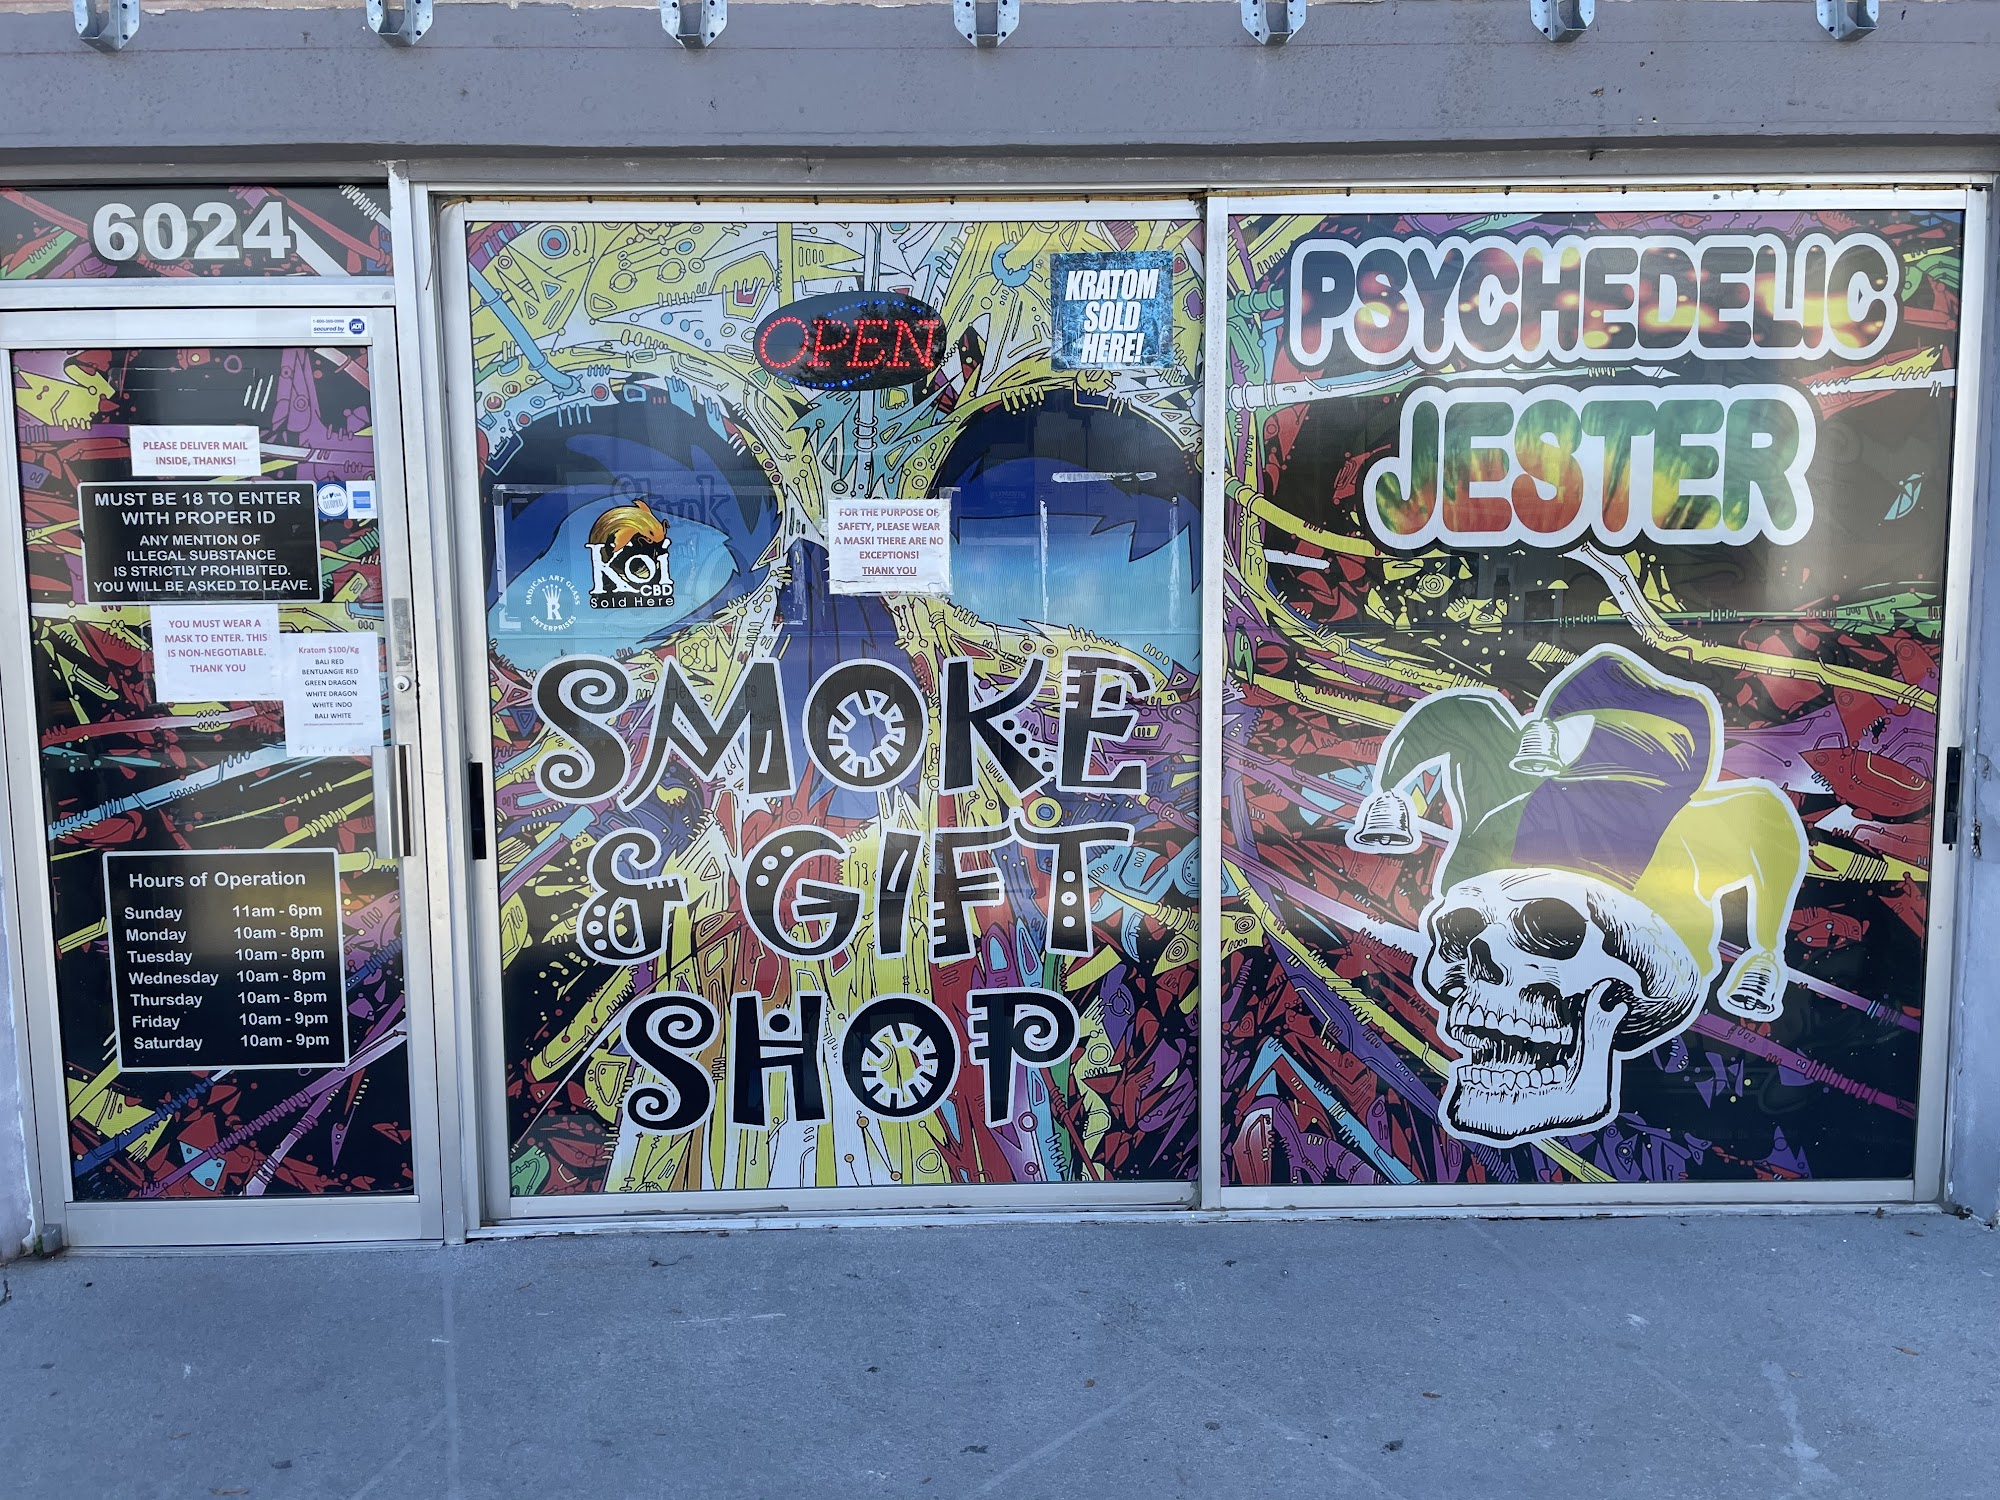 The Psychedelic Jester Smoke & Gift Shop